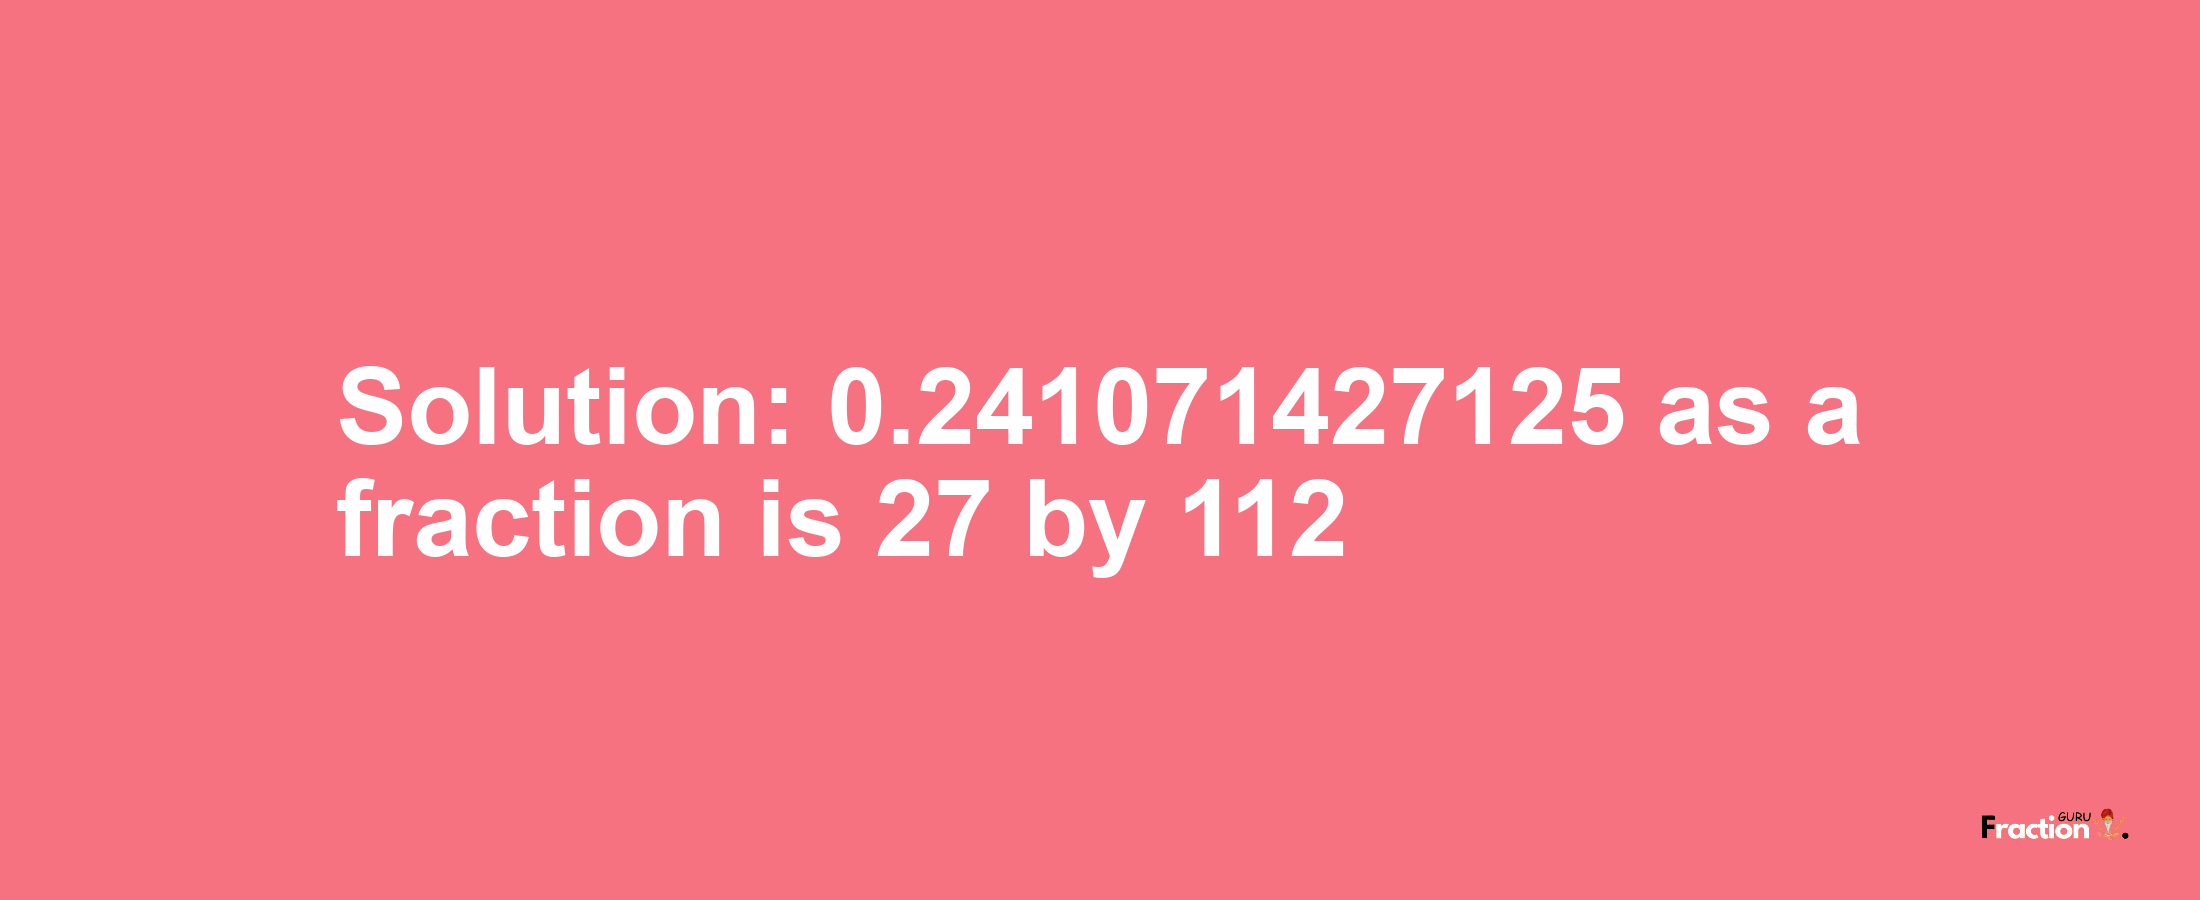 Solution:0.241071427125 as a fraction is 27/112